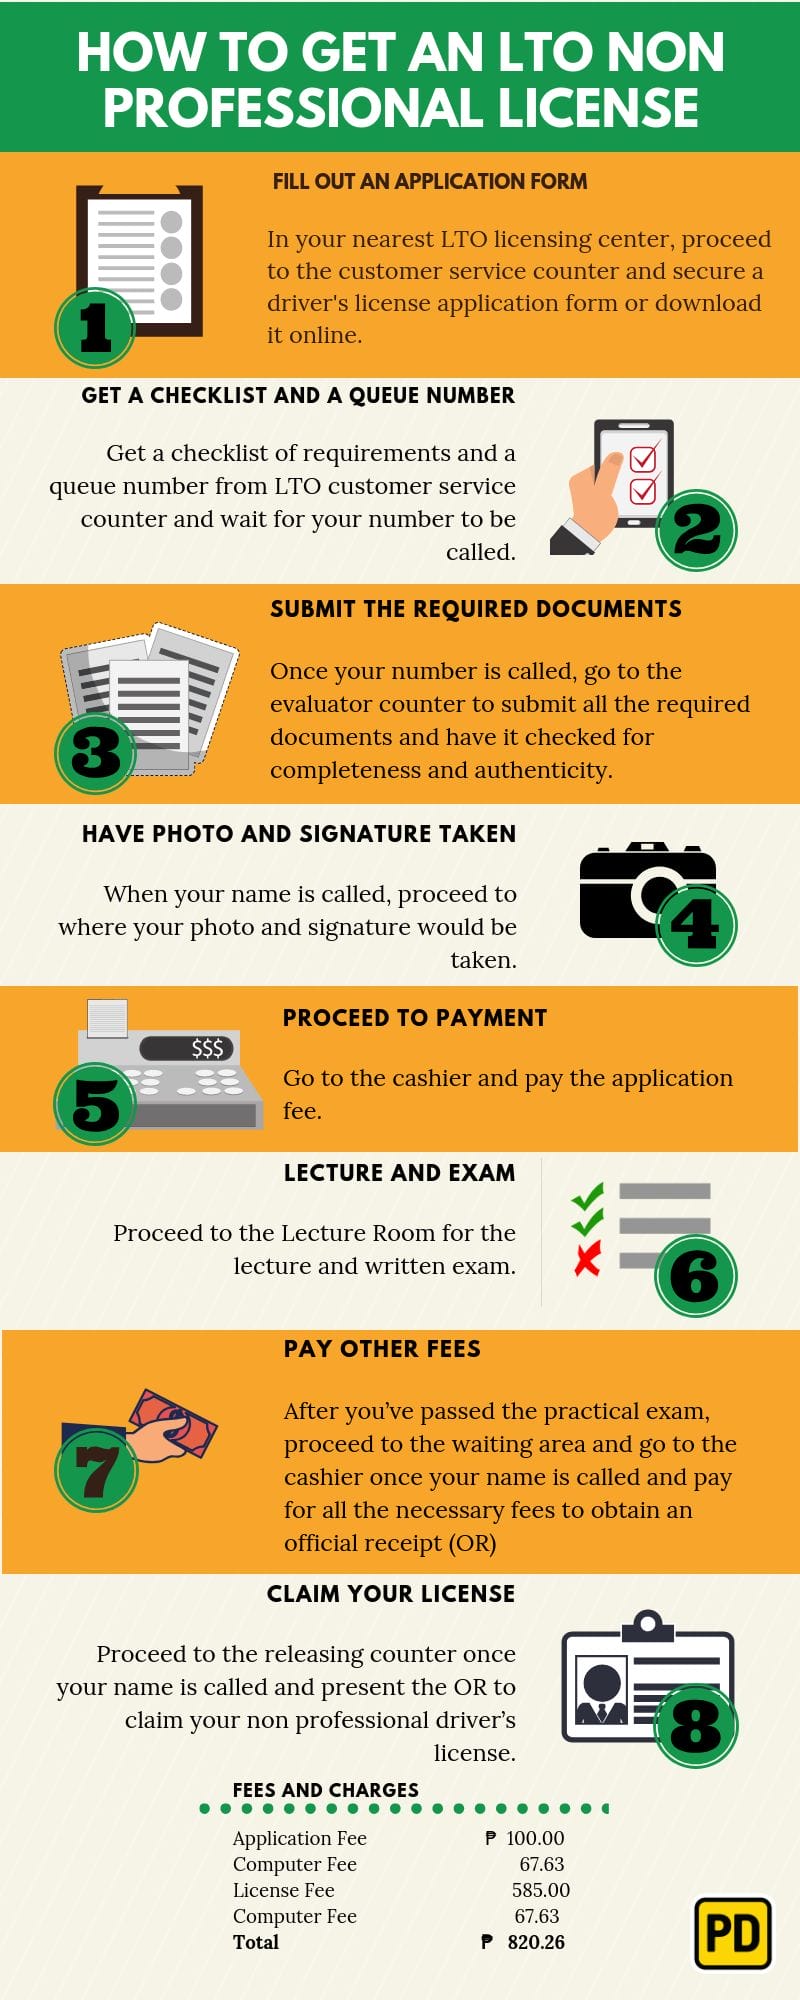 Infographic of steps to take to get a non-professional license